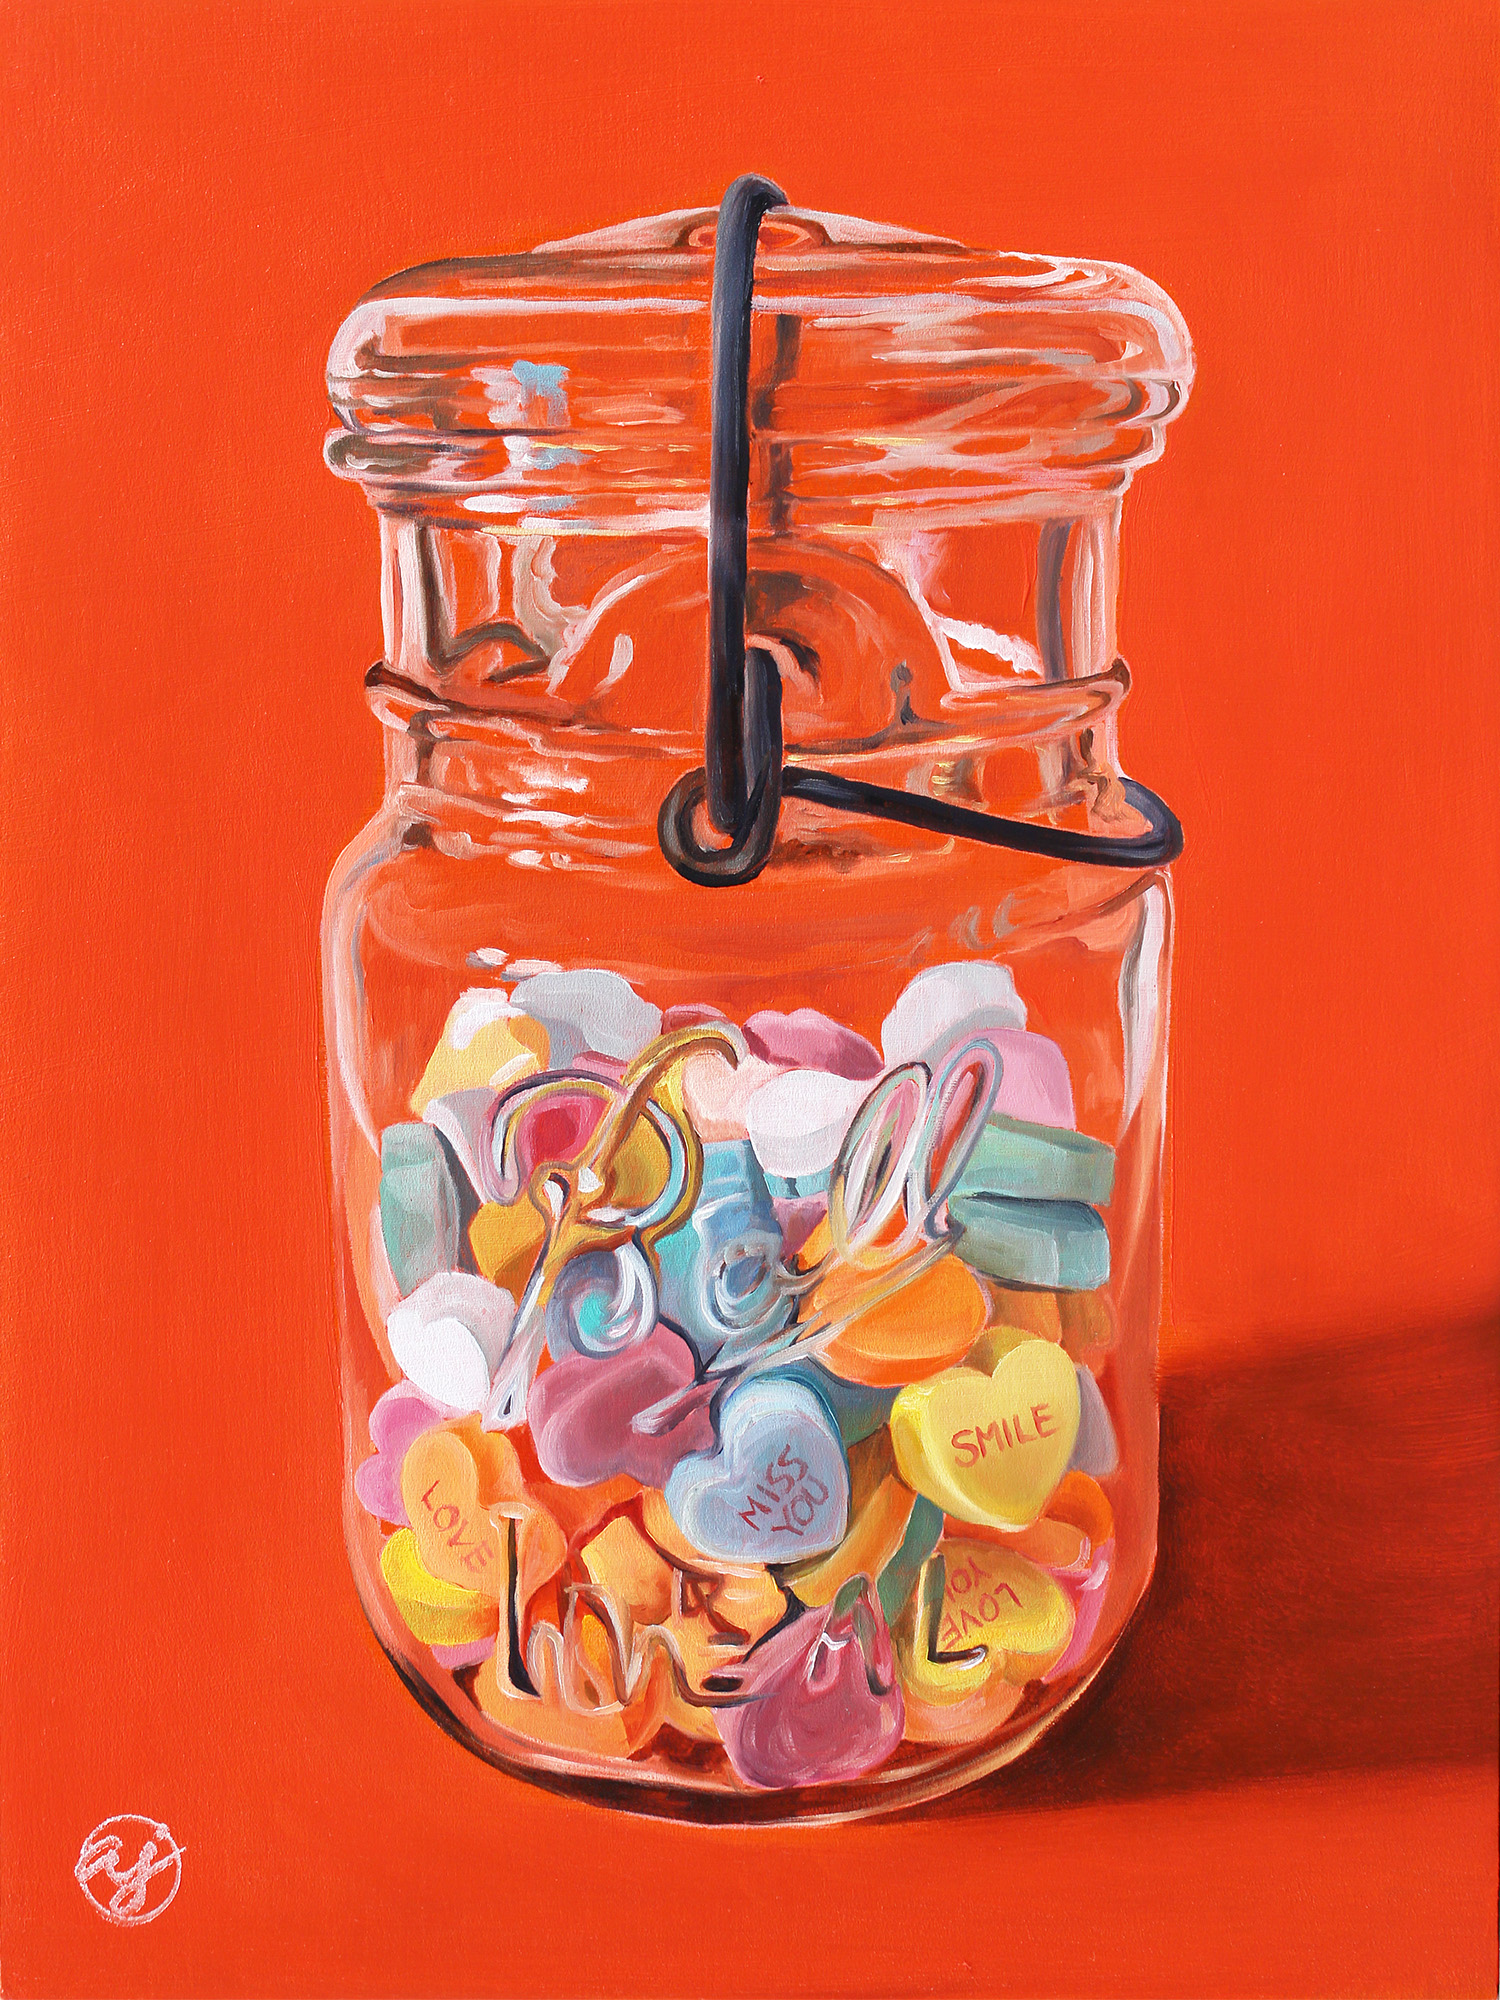 "Candy Heart" 9x12" Original Oil Painting by Abra Johnson